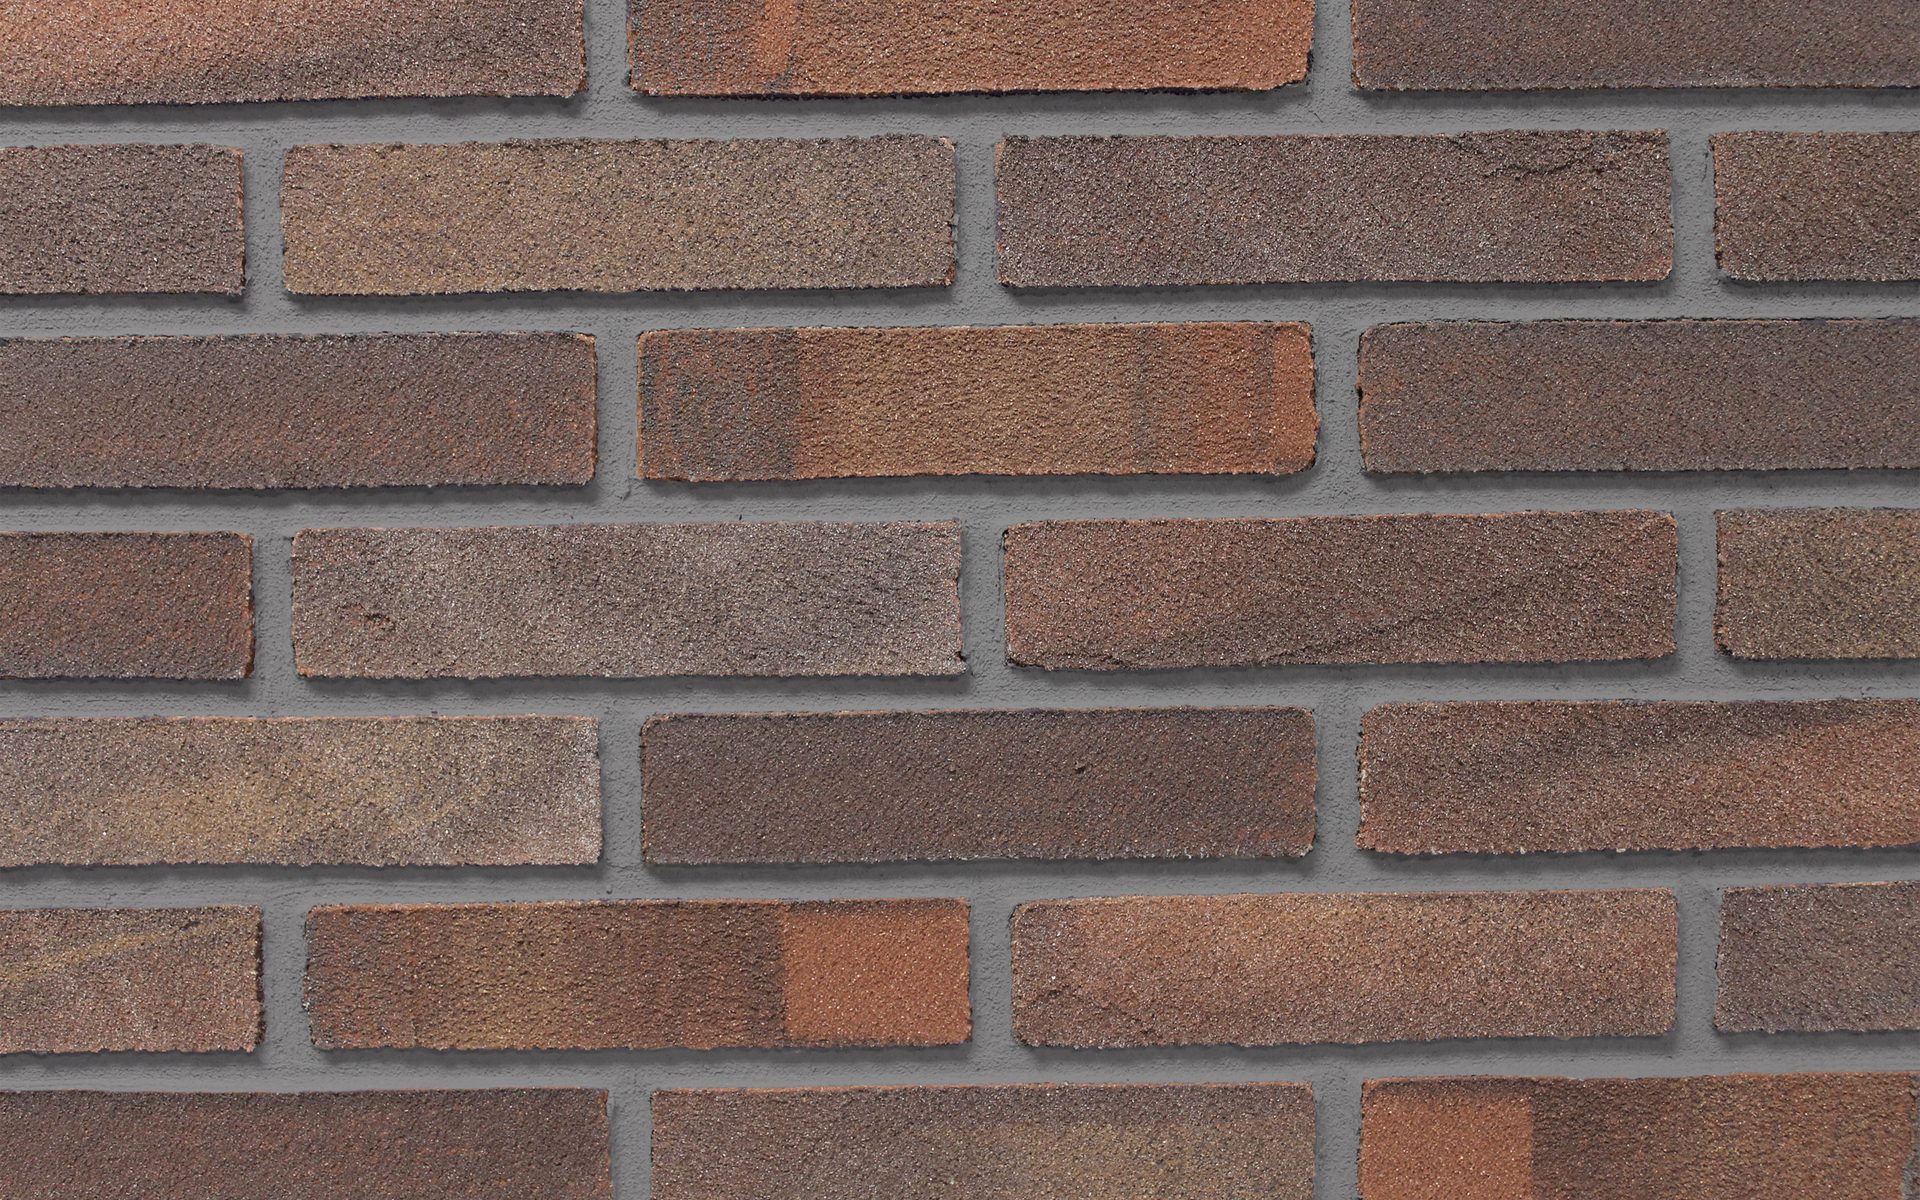 swatch of StoCast brick product called Wexford